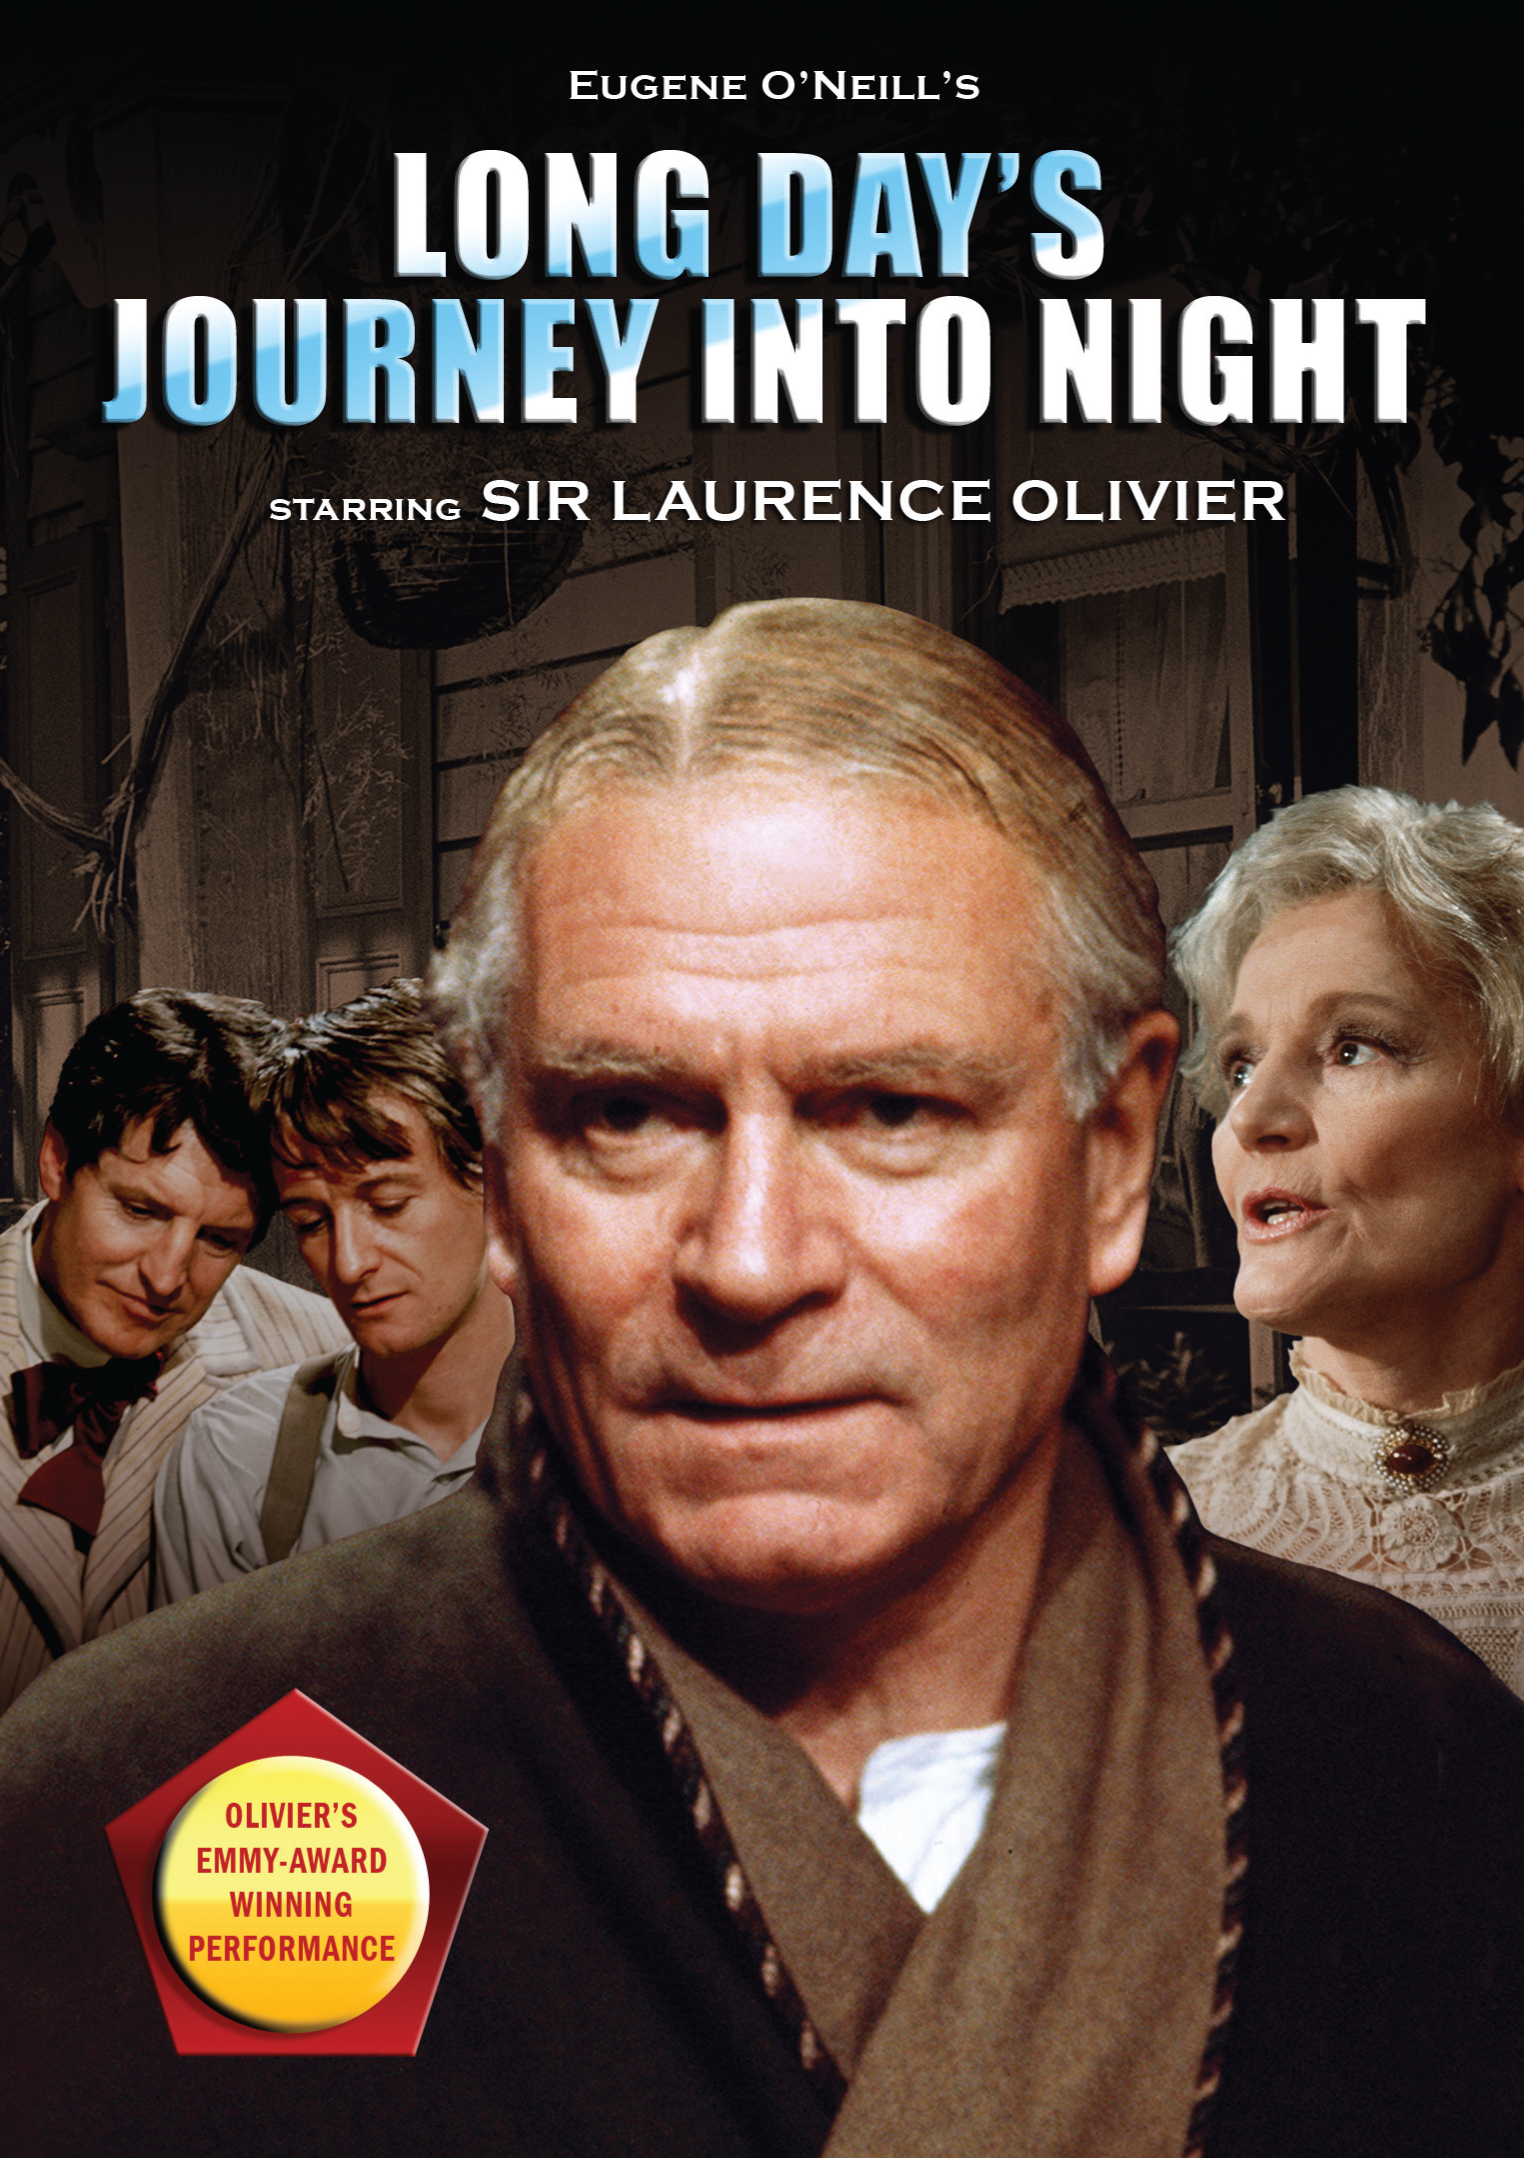 Long Day's Journey into Night (1973) Michael Blakemore, Peter Wood